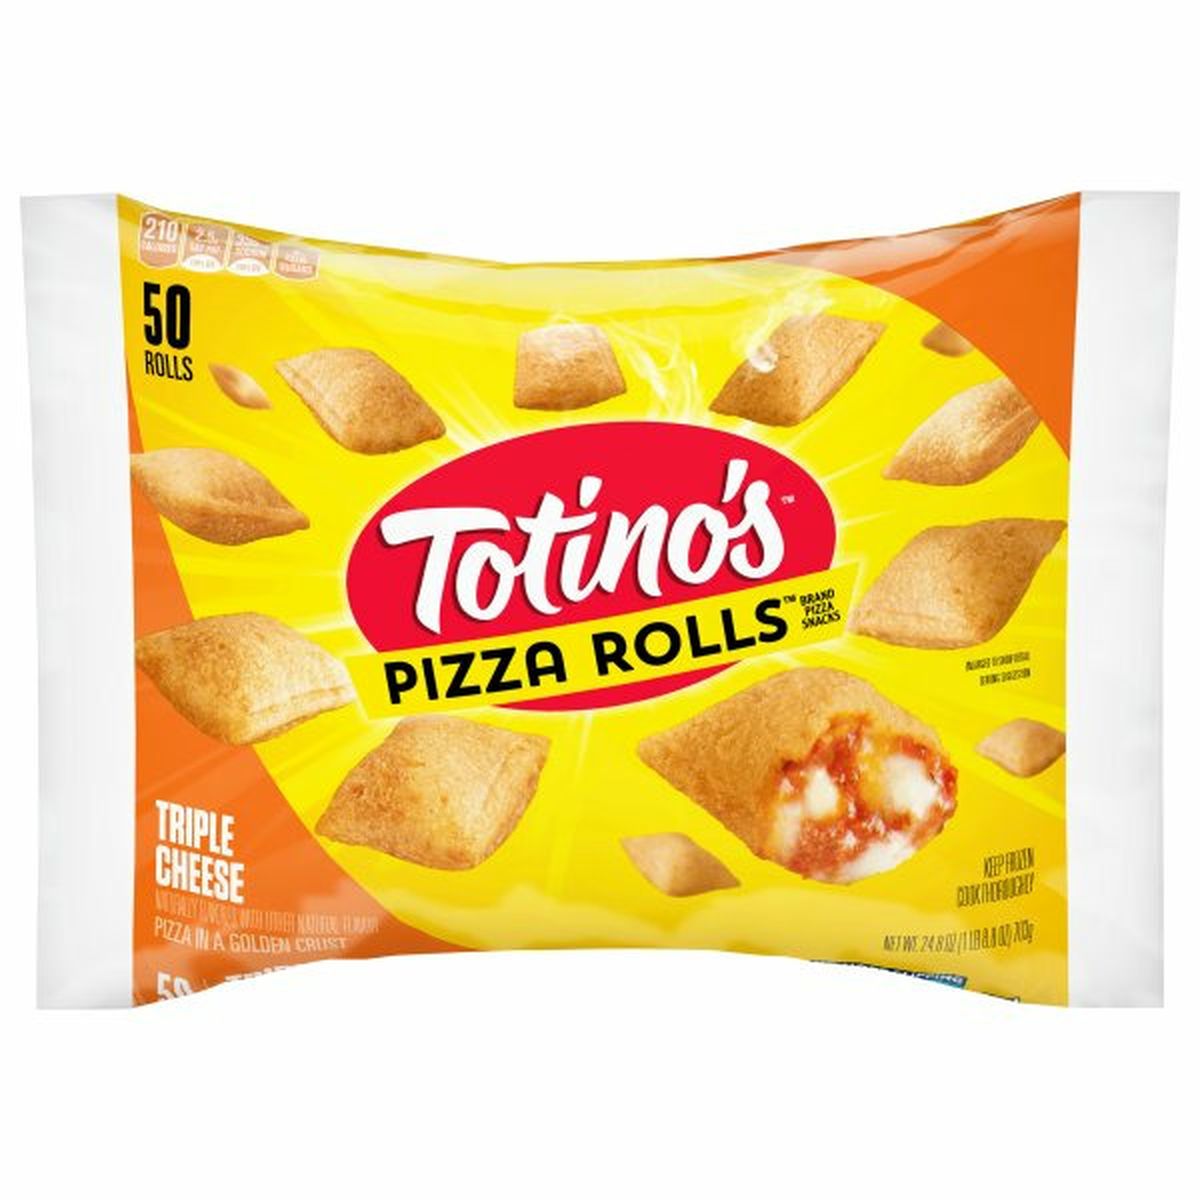 Calories in Totino's Pizza Rolls, Triple Cheese